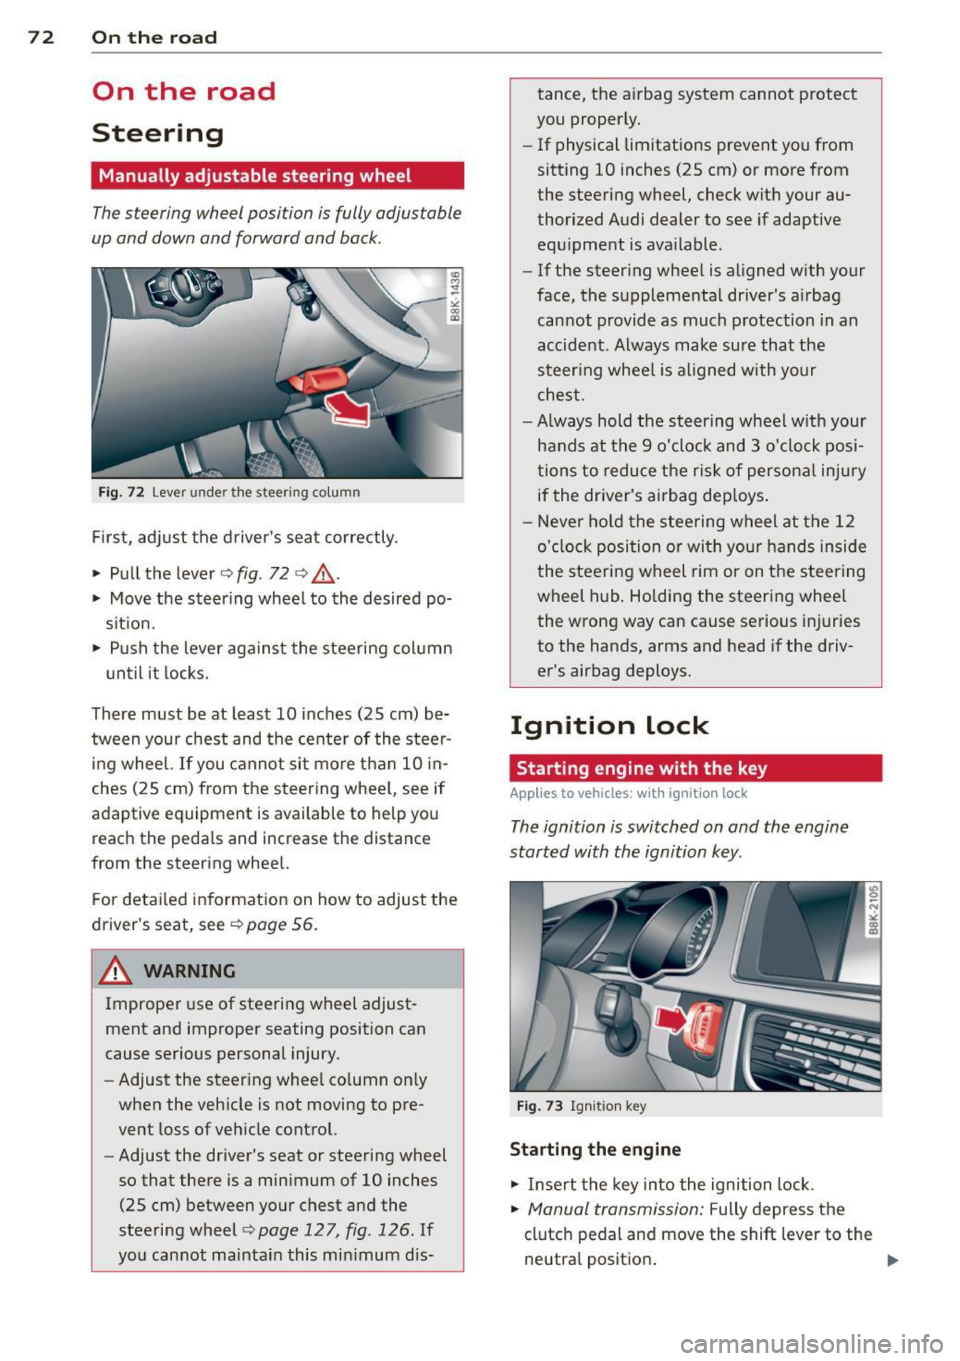 AUDI S4 SEDAN 2013  Owners Manual 7 2  On  the road 
On  the  road 
Steering 
Manually  adjustable  steering  wheel 
The steering  wheel  position  is fully  adjustable 
up and  down  and  forward  and  bock . 
<D !3 
-
" a, a, 
Fig. 